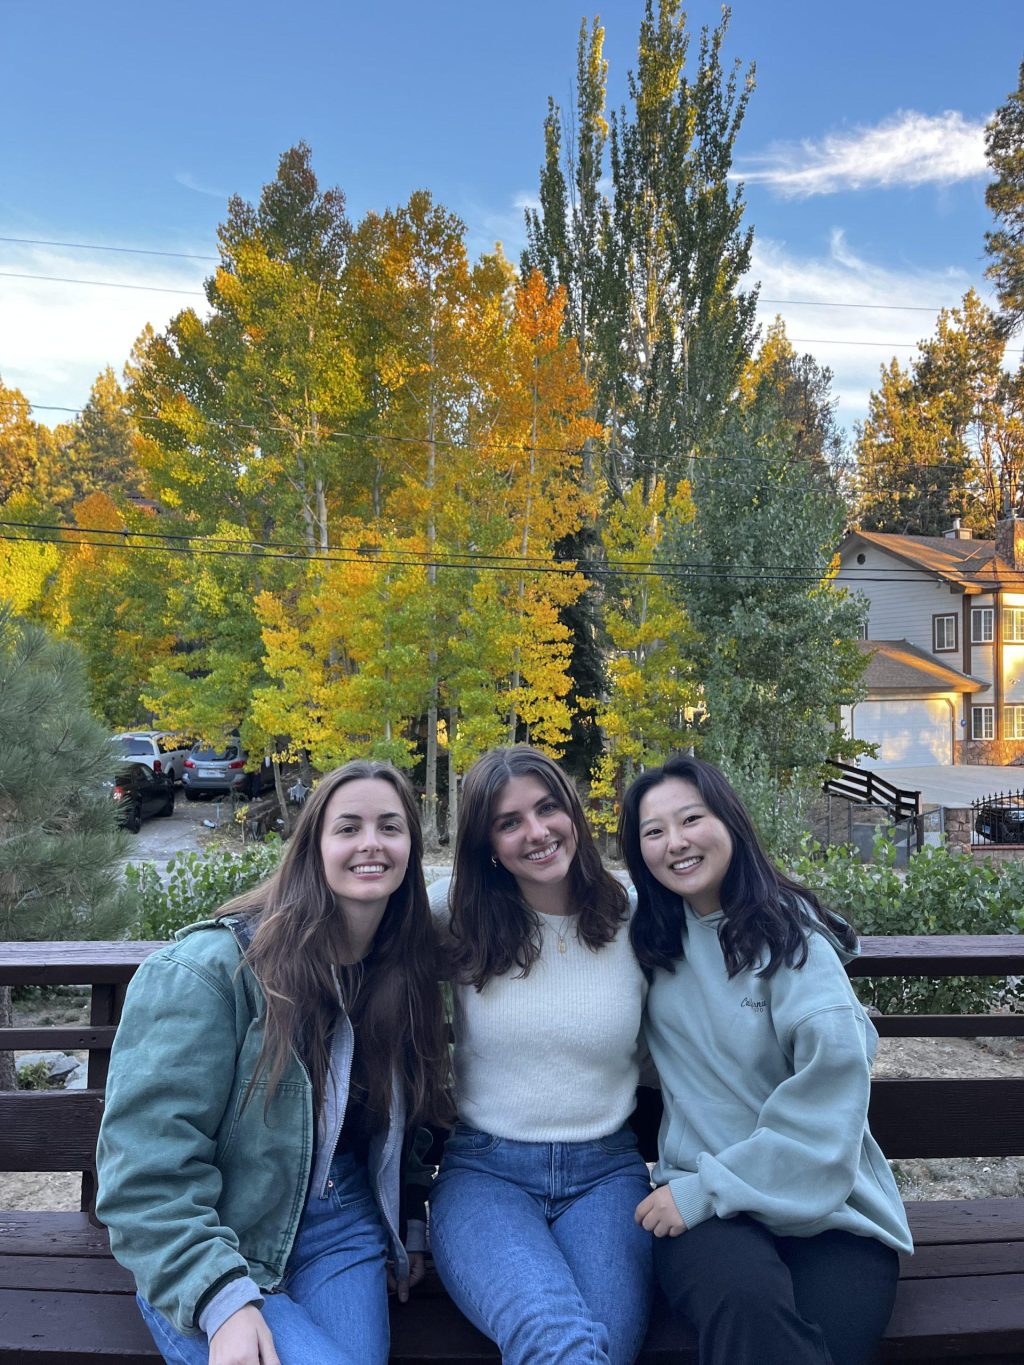 Junior Kristin Coady visits Big Bear Lake with friends junior Eden Reitnour (left) and junior Hannah Lee (right) over fall break. Coady said she enjoyed seeing the fall color in Big Bear. Photo courtesy of Kristin Coady